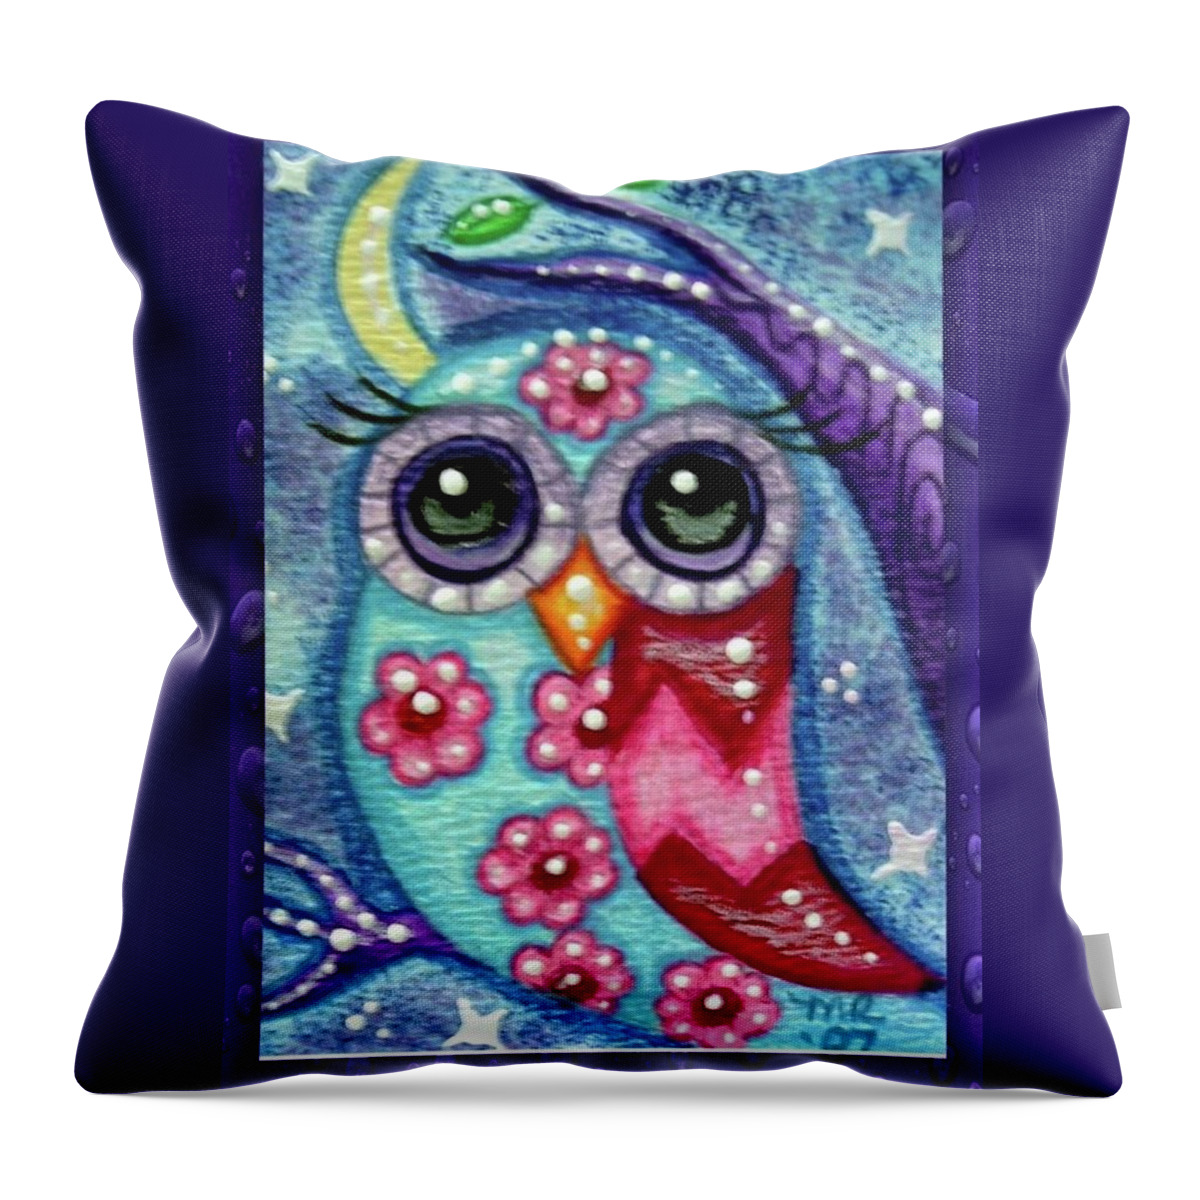 Whimsical Throw Pillow featuring the painting Whimsical Floral Owl by Monica Resinger